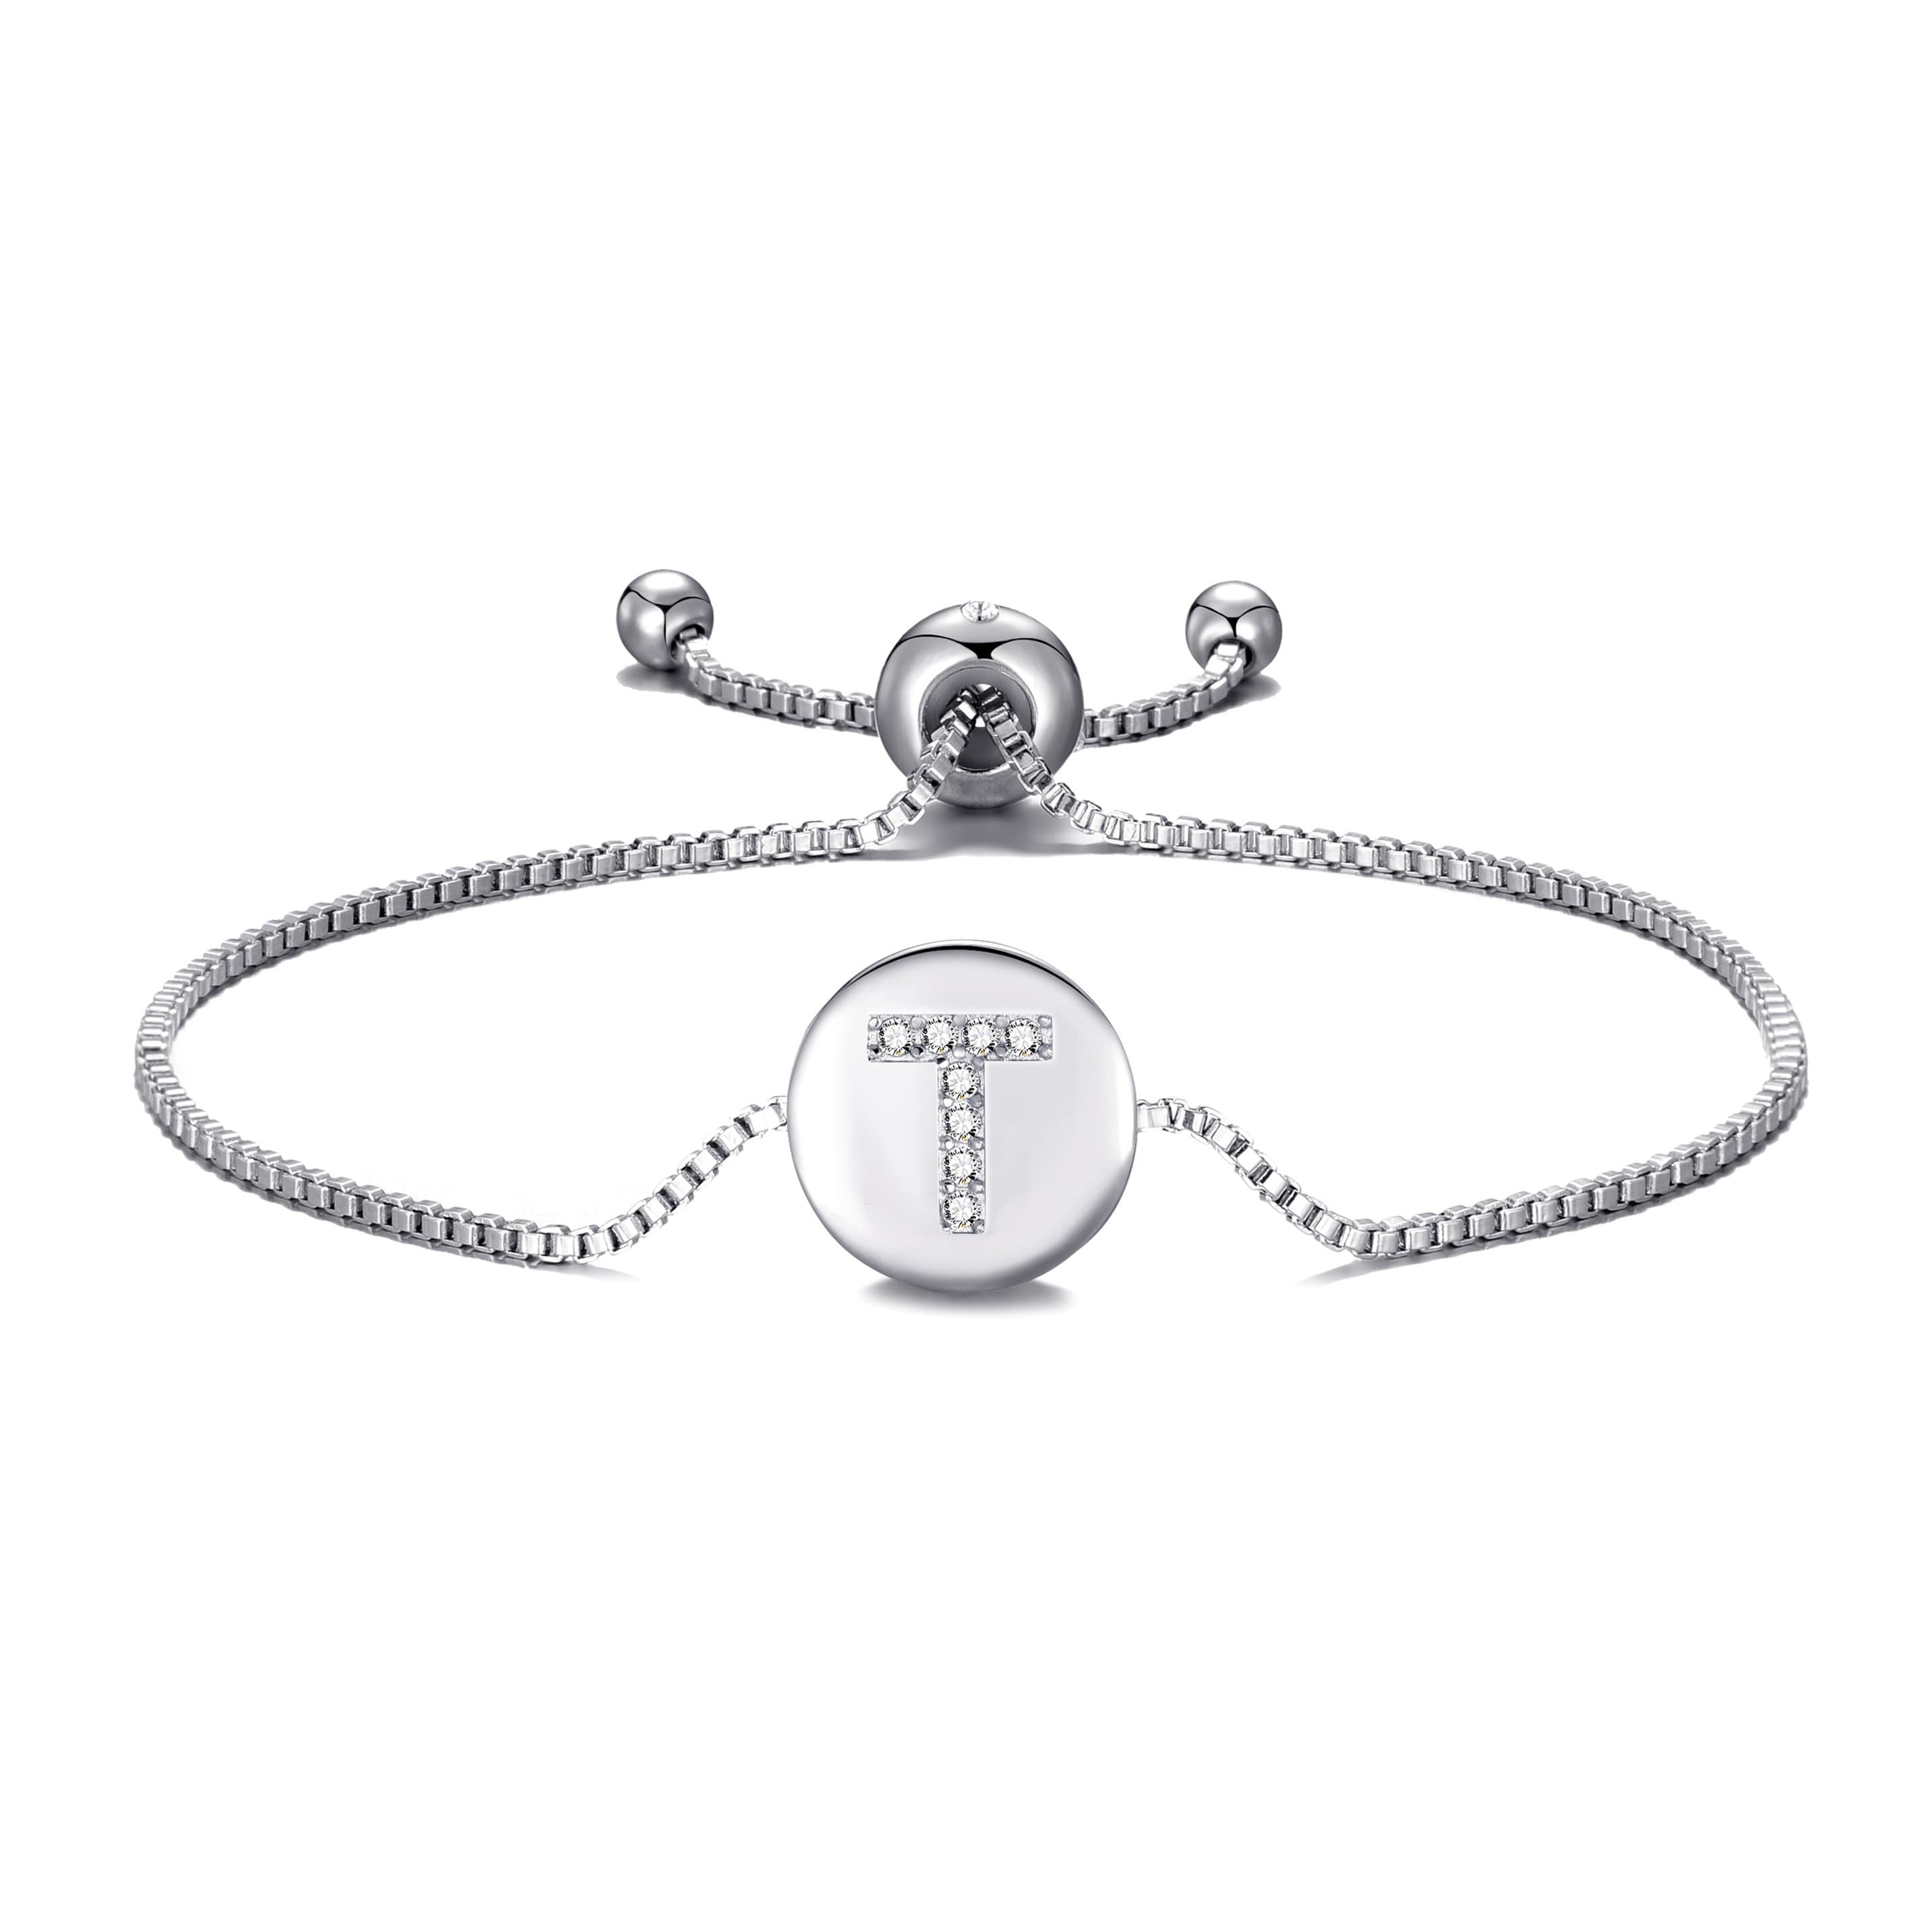 Initial Friendship Bracelet Letter T Created with Zircondia® Crystals by Philip Jones Jewellery